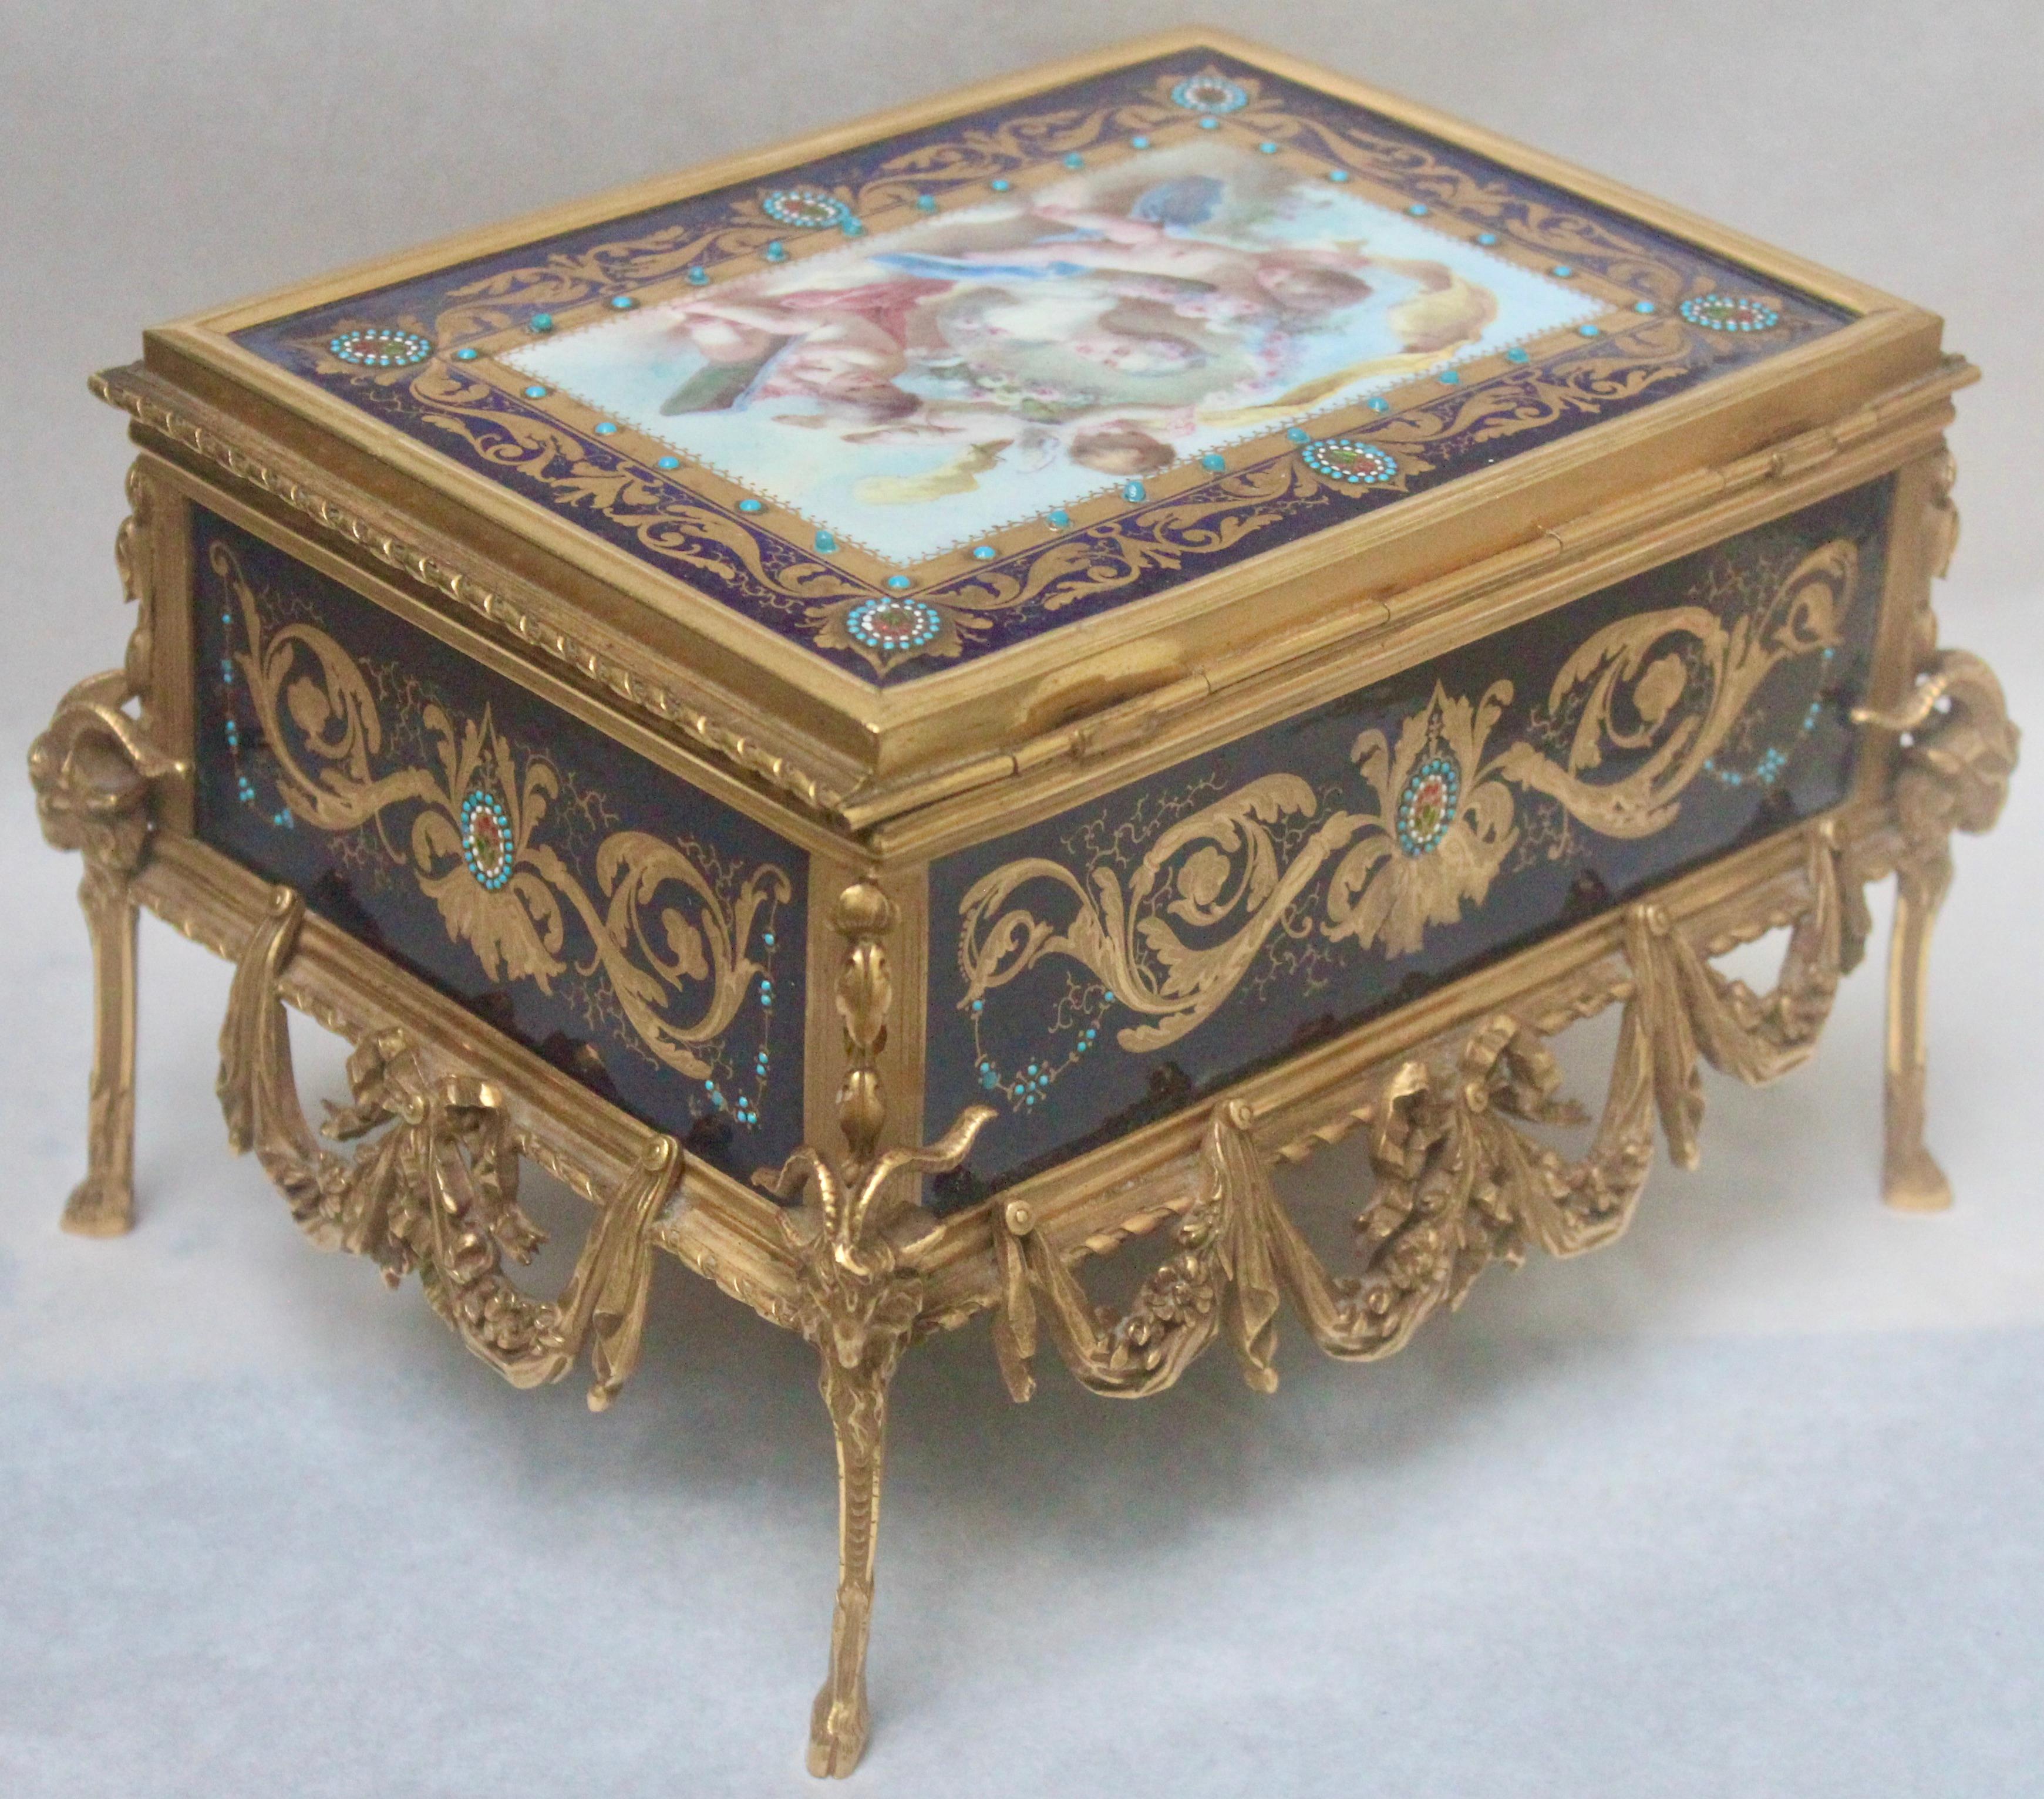 French 19th century hand painted enameled and ormolu-mounted jewelry casket
A rectangular ormolu-mounted and enameled plaques
With Blue Sèvres background and golden rinceaux and flowers heightened by blue, white, green and red Bresse